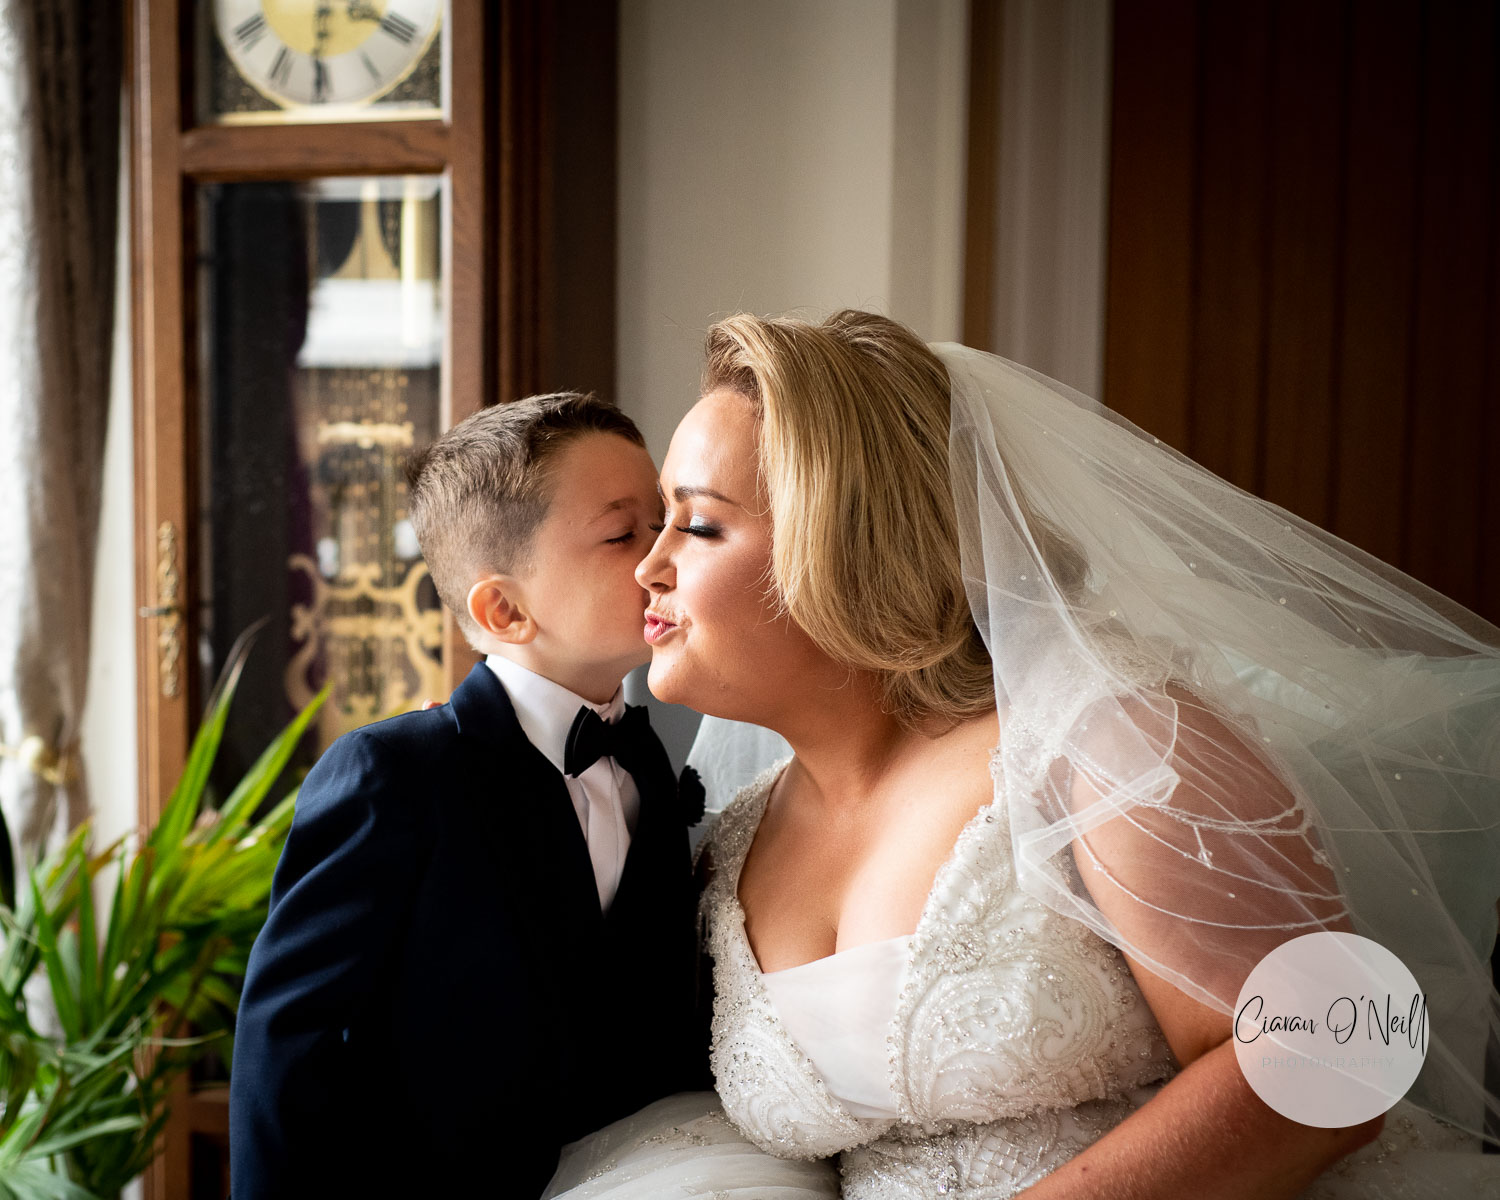 Bride and her nephew sharing a wee moment